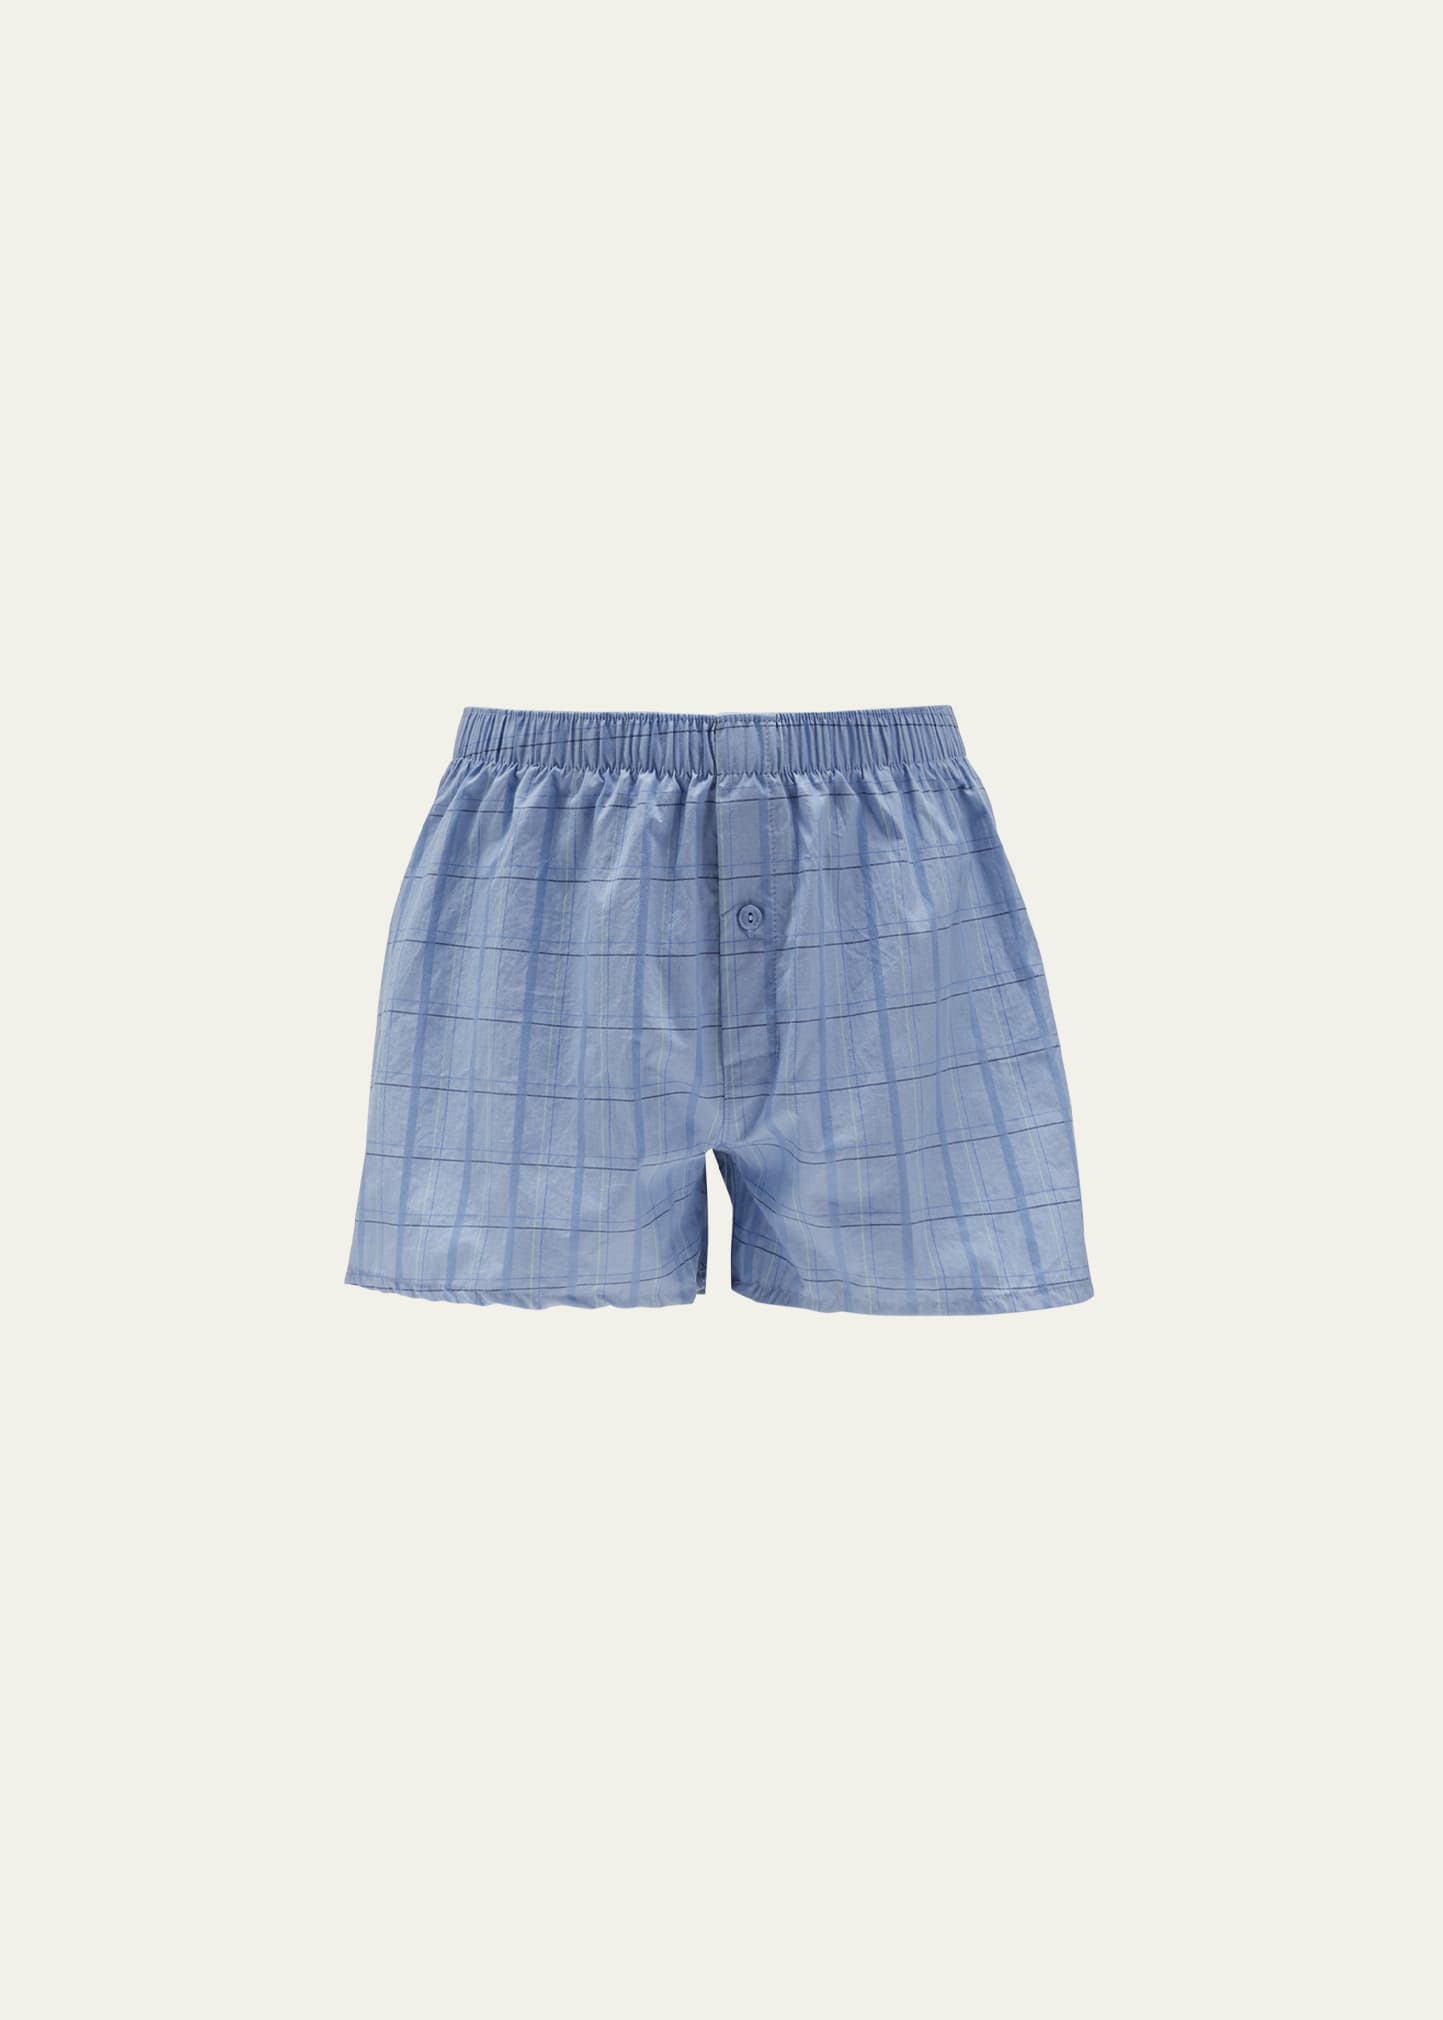 Hanro Fancy Woven Boxers In Galactic Check